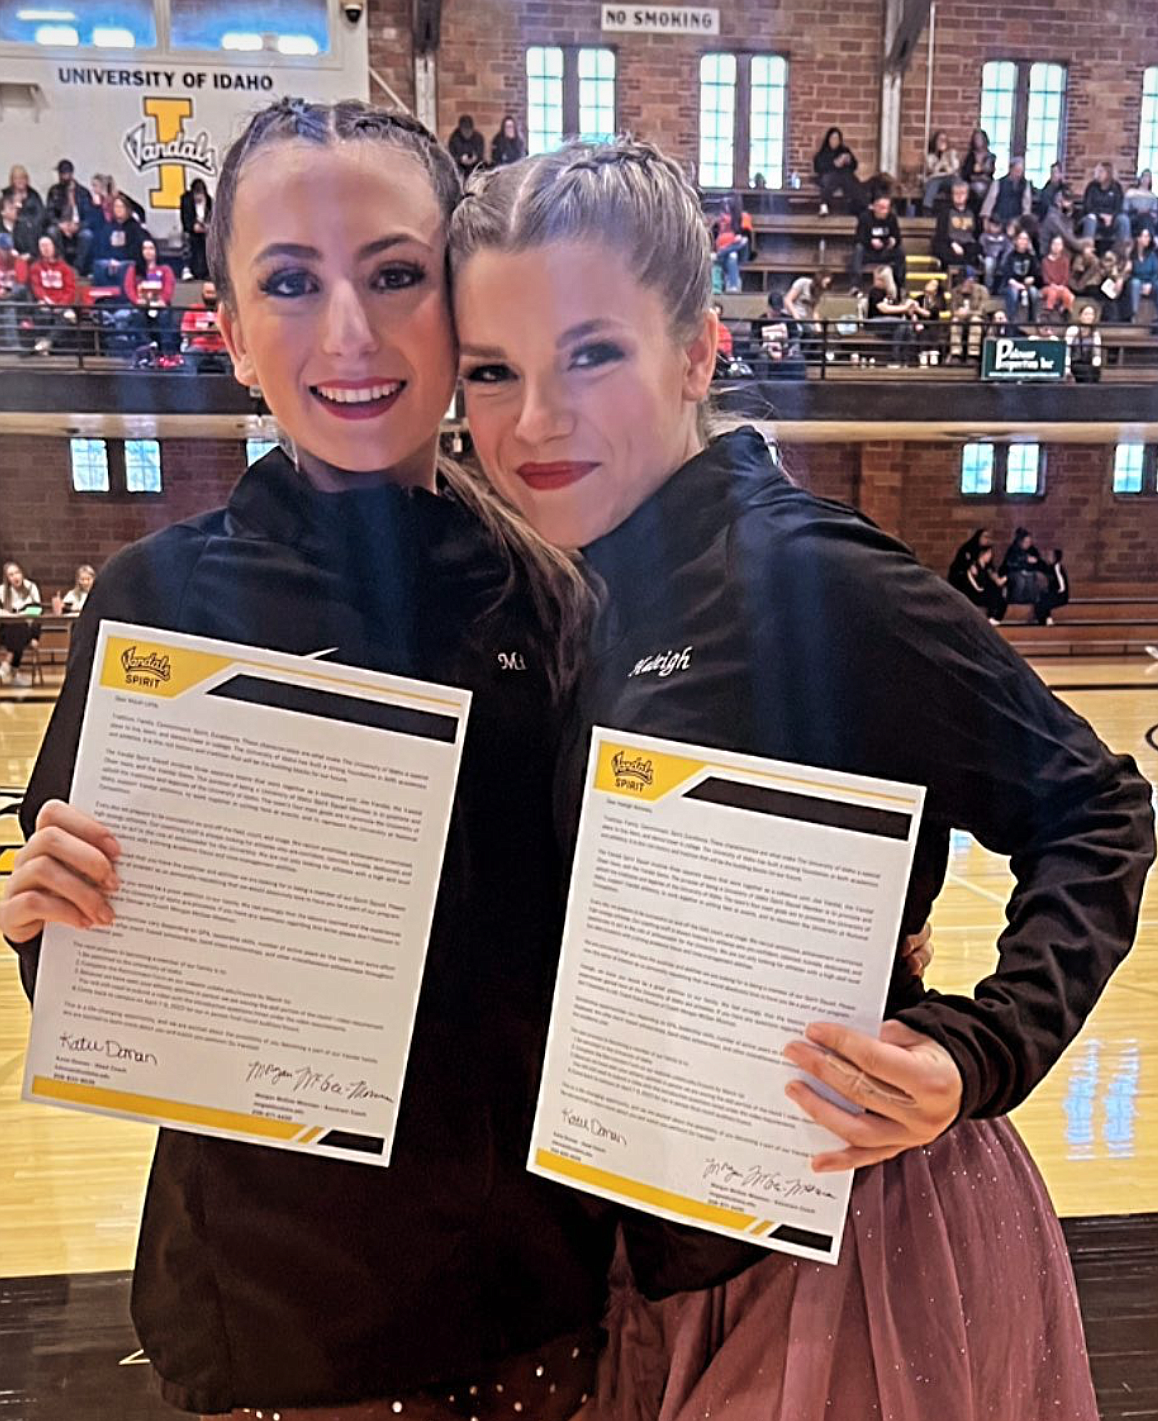 Mikah Little and Haleigh Knowles both received recruitment letters from the University of Idaho while competing at the Vandal Spirit Challenge Competition.